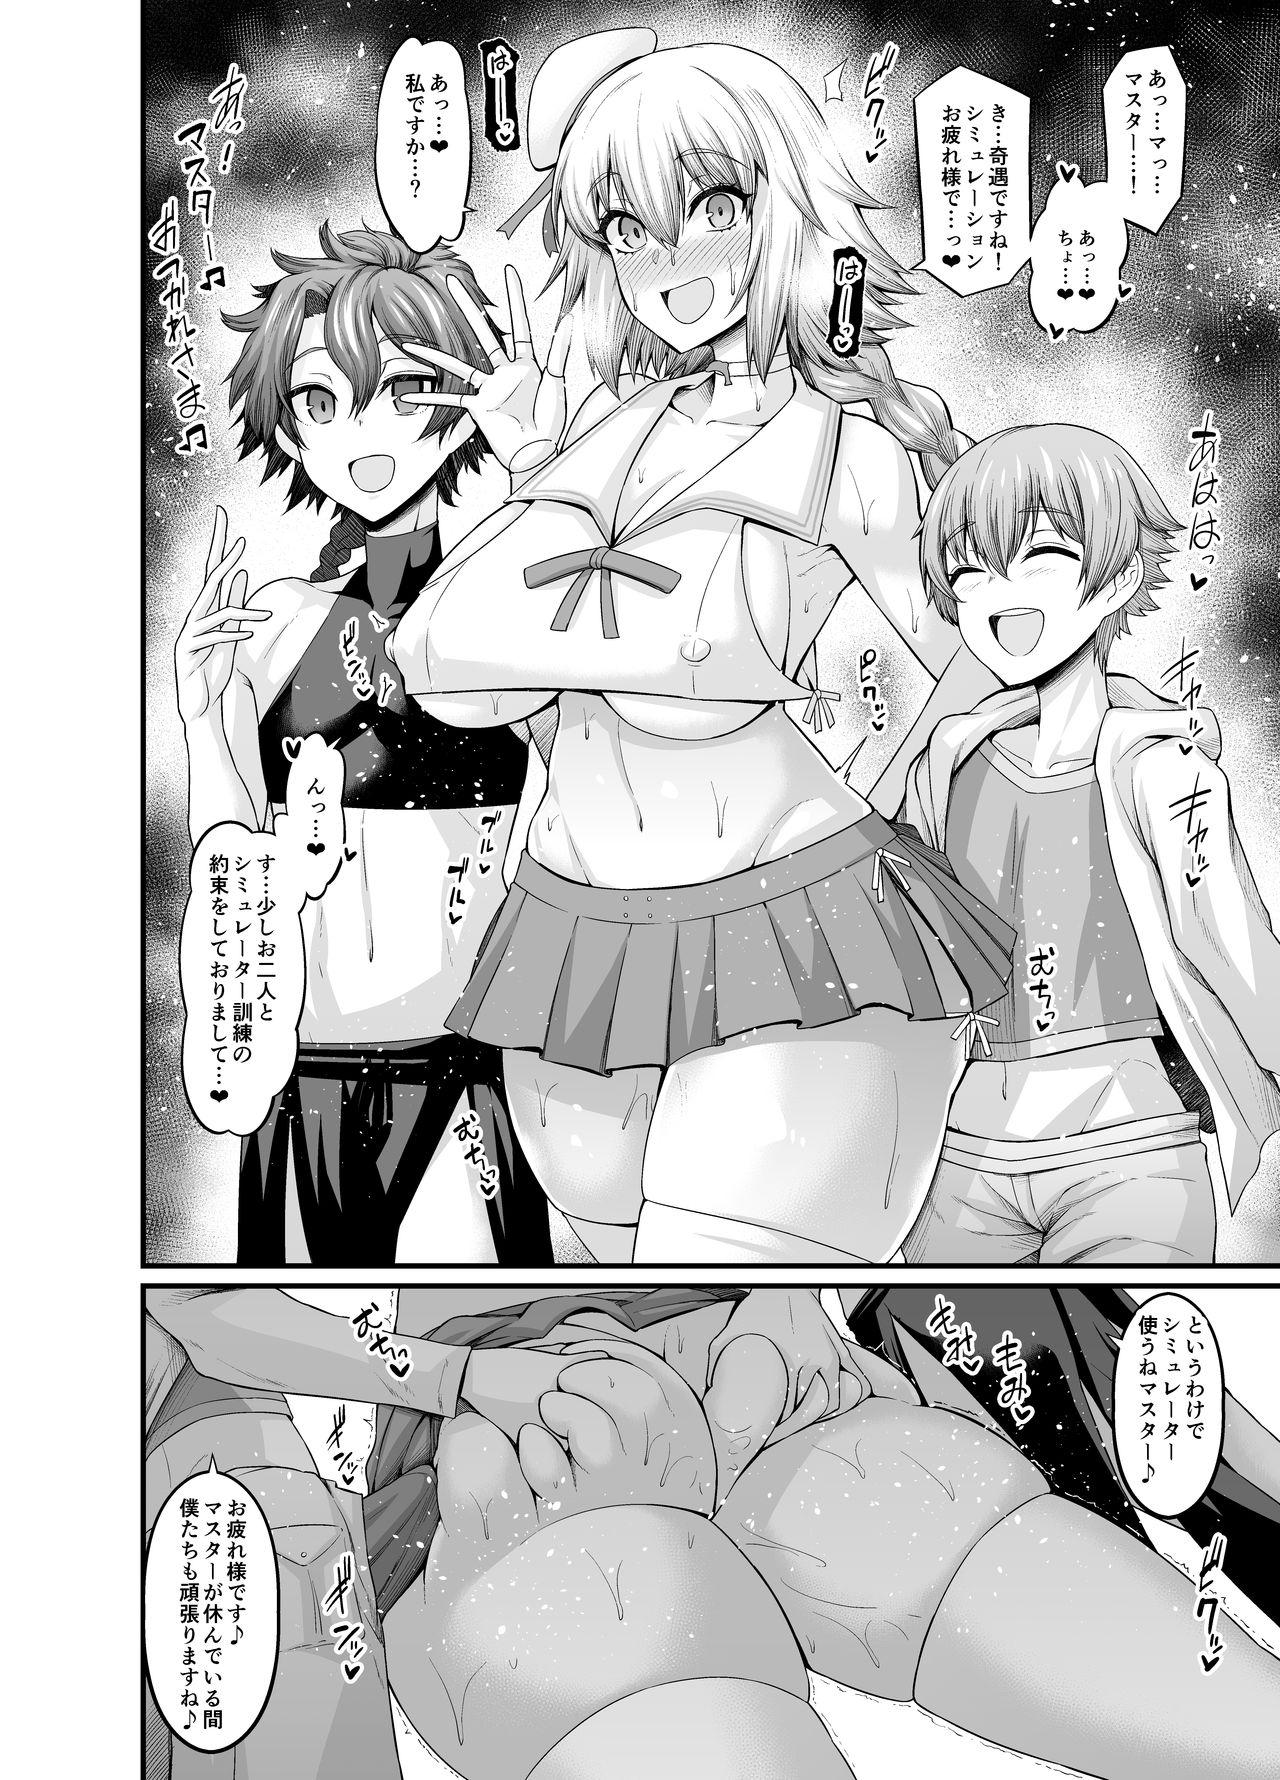 Comedor Jeanne to Issho ni Training - Fate grand order Women - Page 1